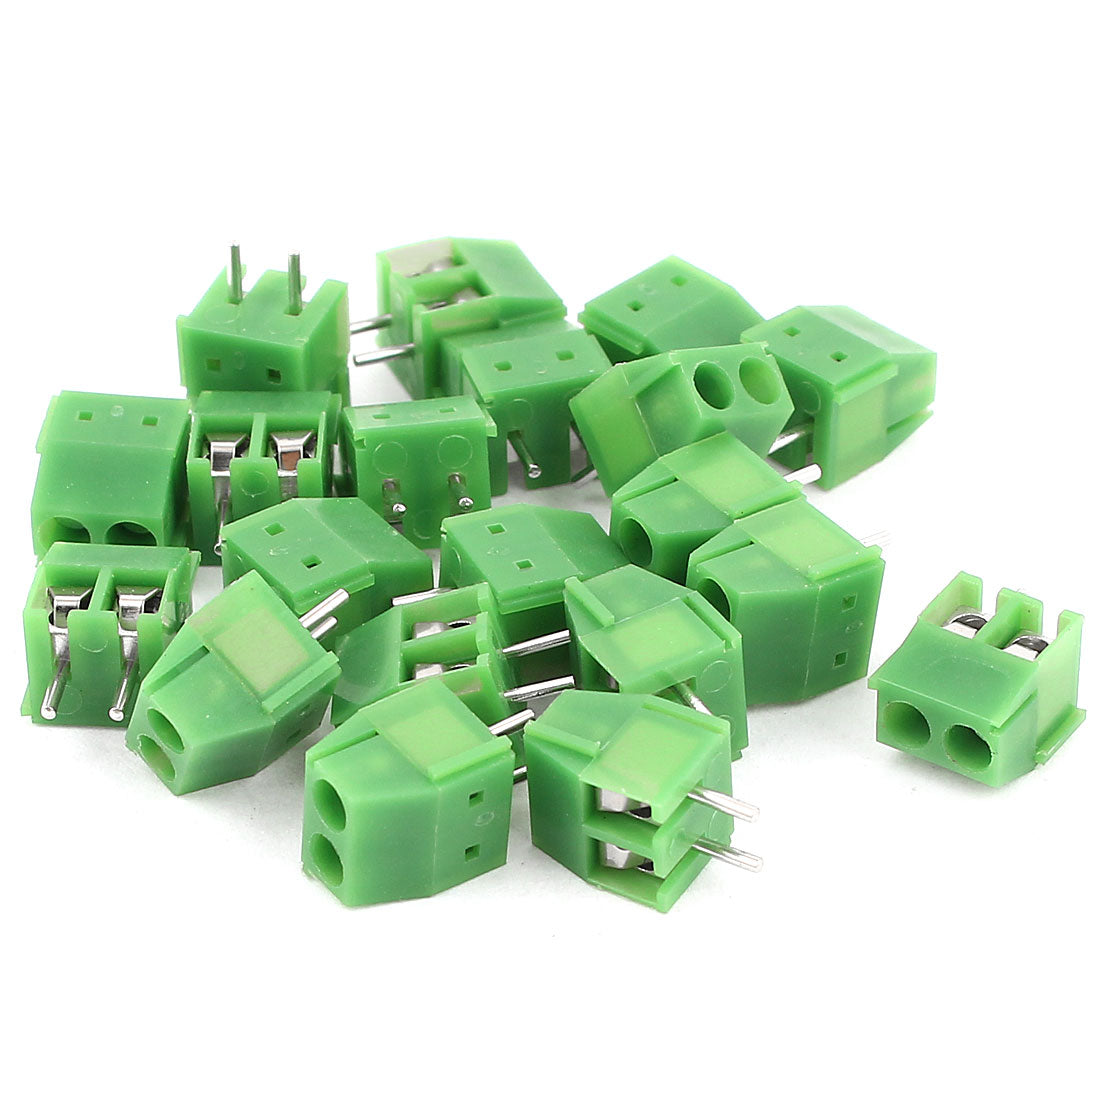 uxcell Uxcell 20 Pcs 3.5mm Pitch 2Pin 2 Way Pluggable Type PCB Mounting Green Detachable Screw Terminal Block Connector